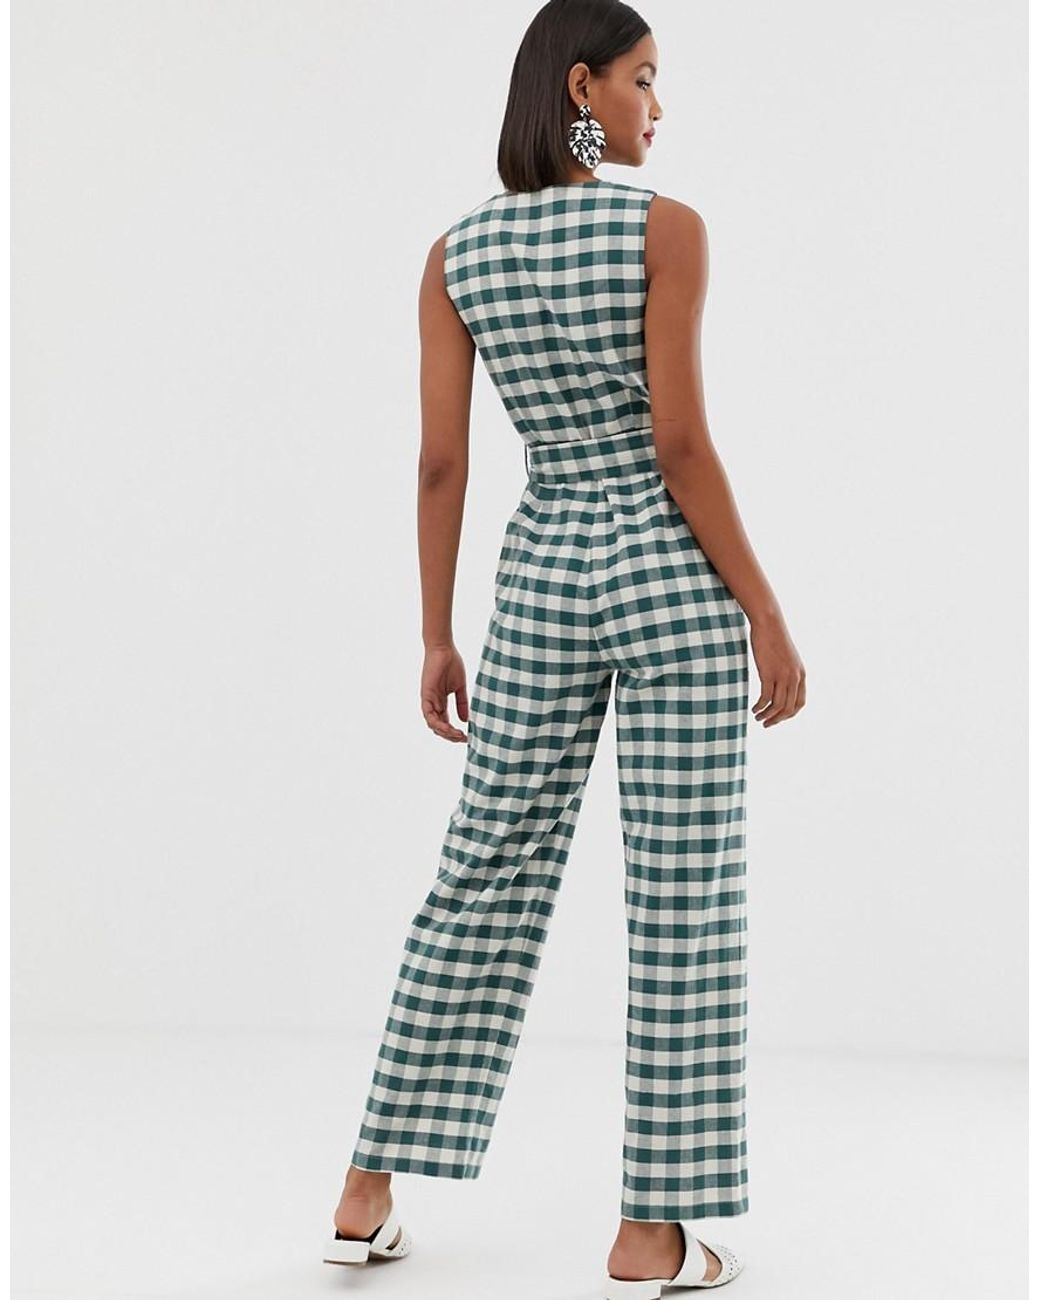 Mango Gingham Printed Jumpsuit in Green | Lyst